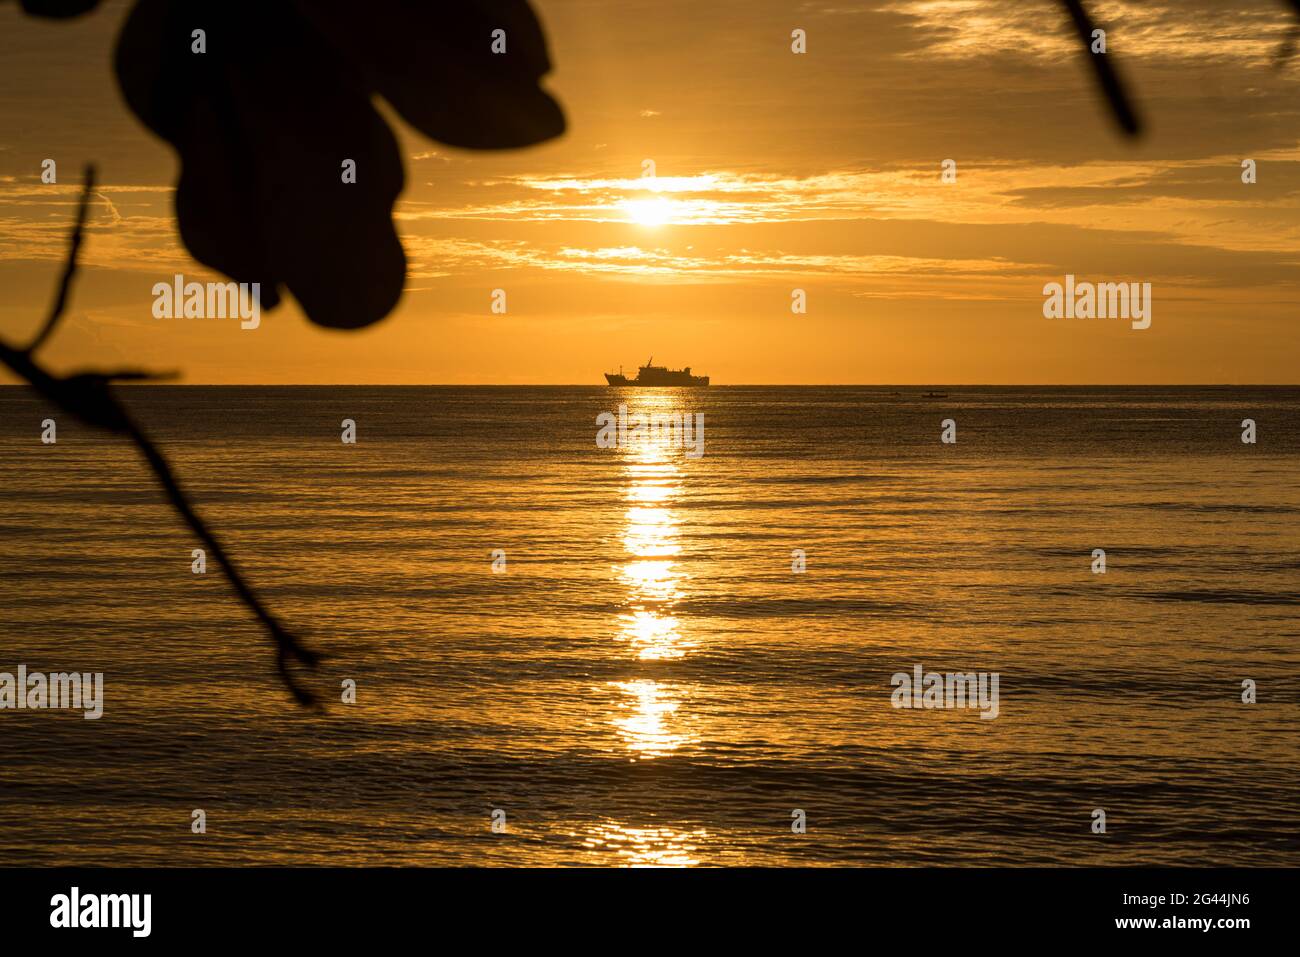 Sunset in the Gulf of Tomini at Ampana on Sulawesi Stock Photo